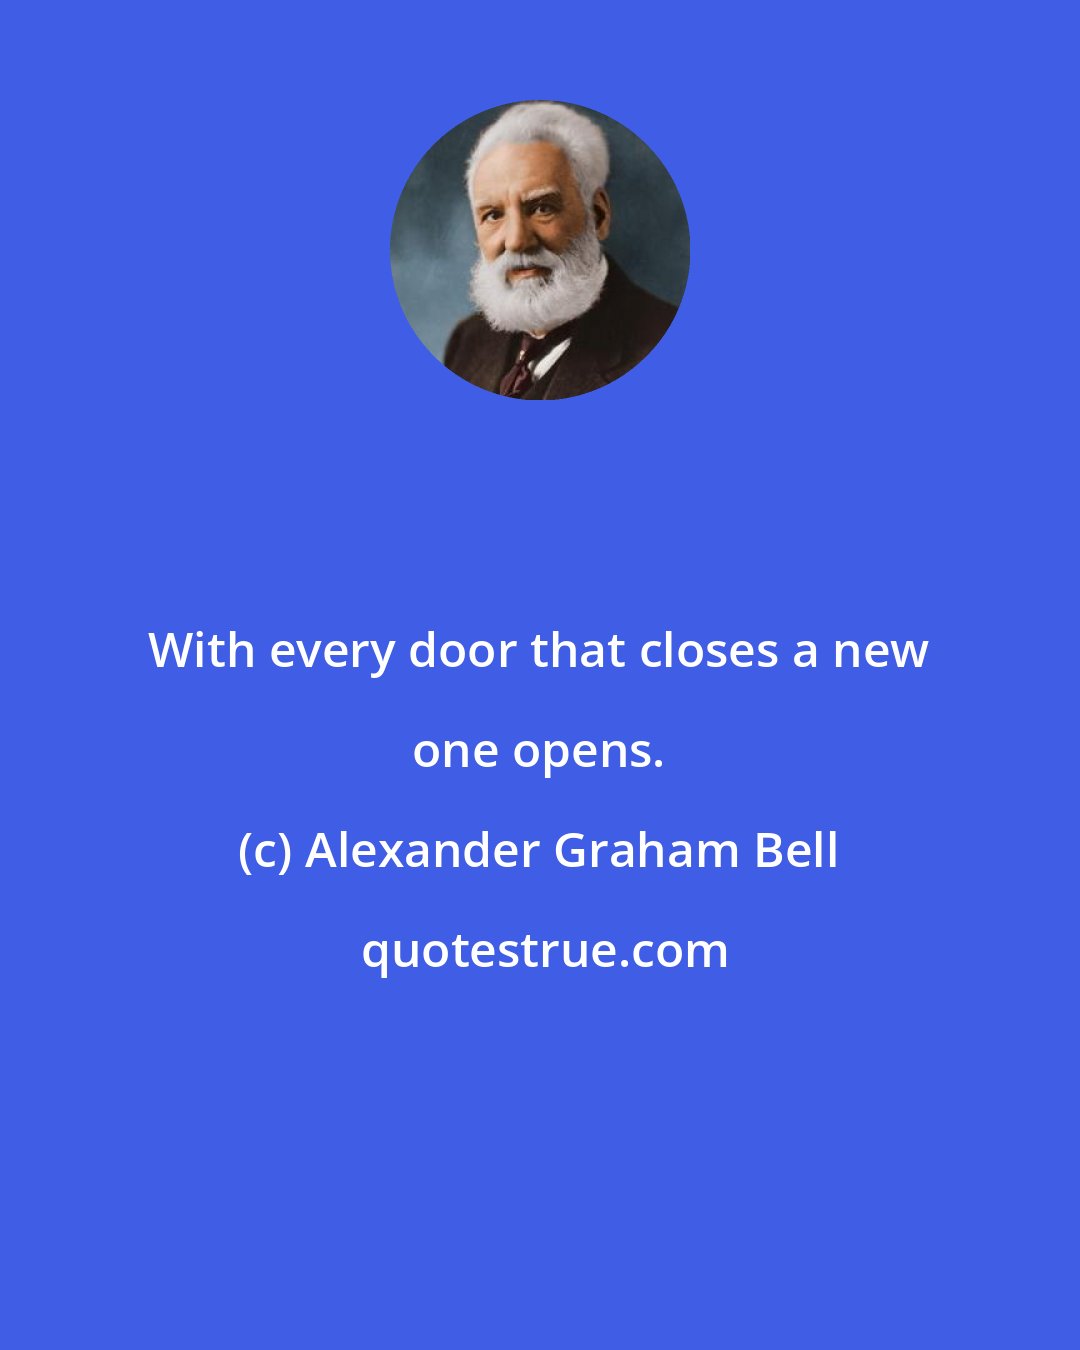 Alexander Graham Bell: With every door that closes a new one opens.